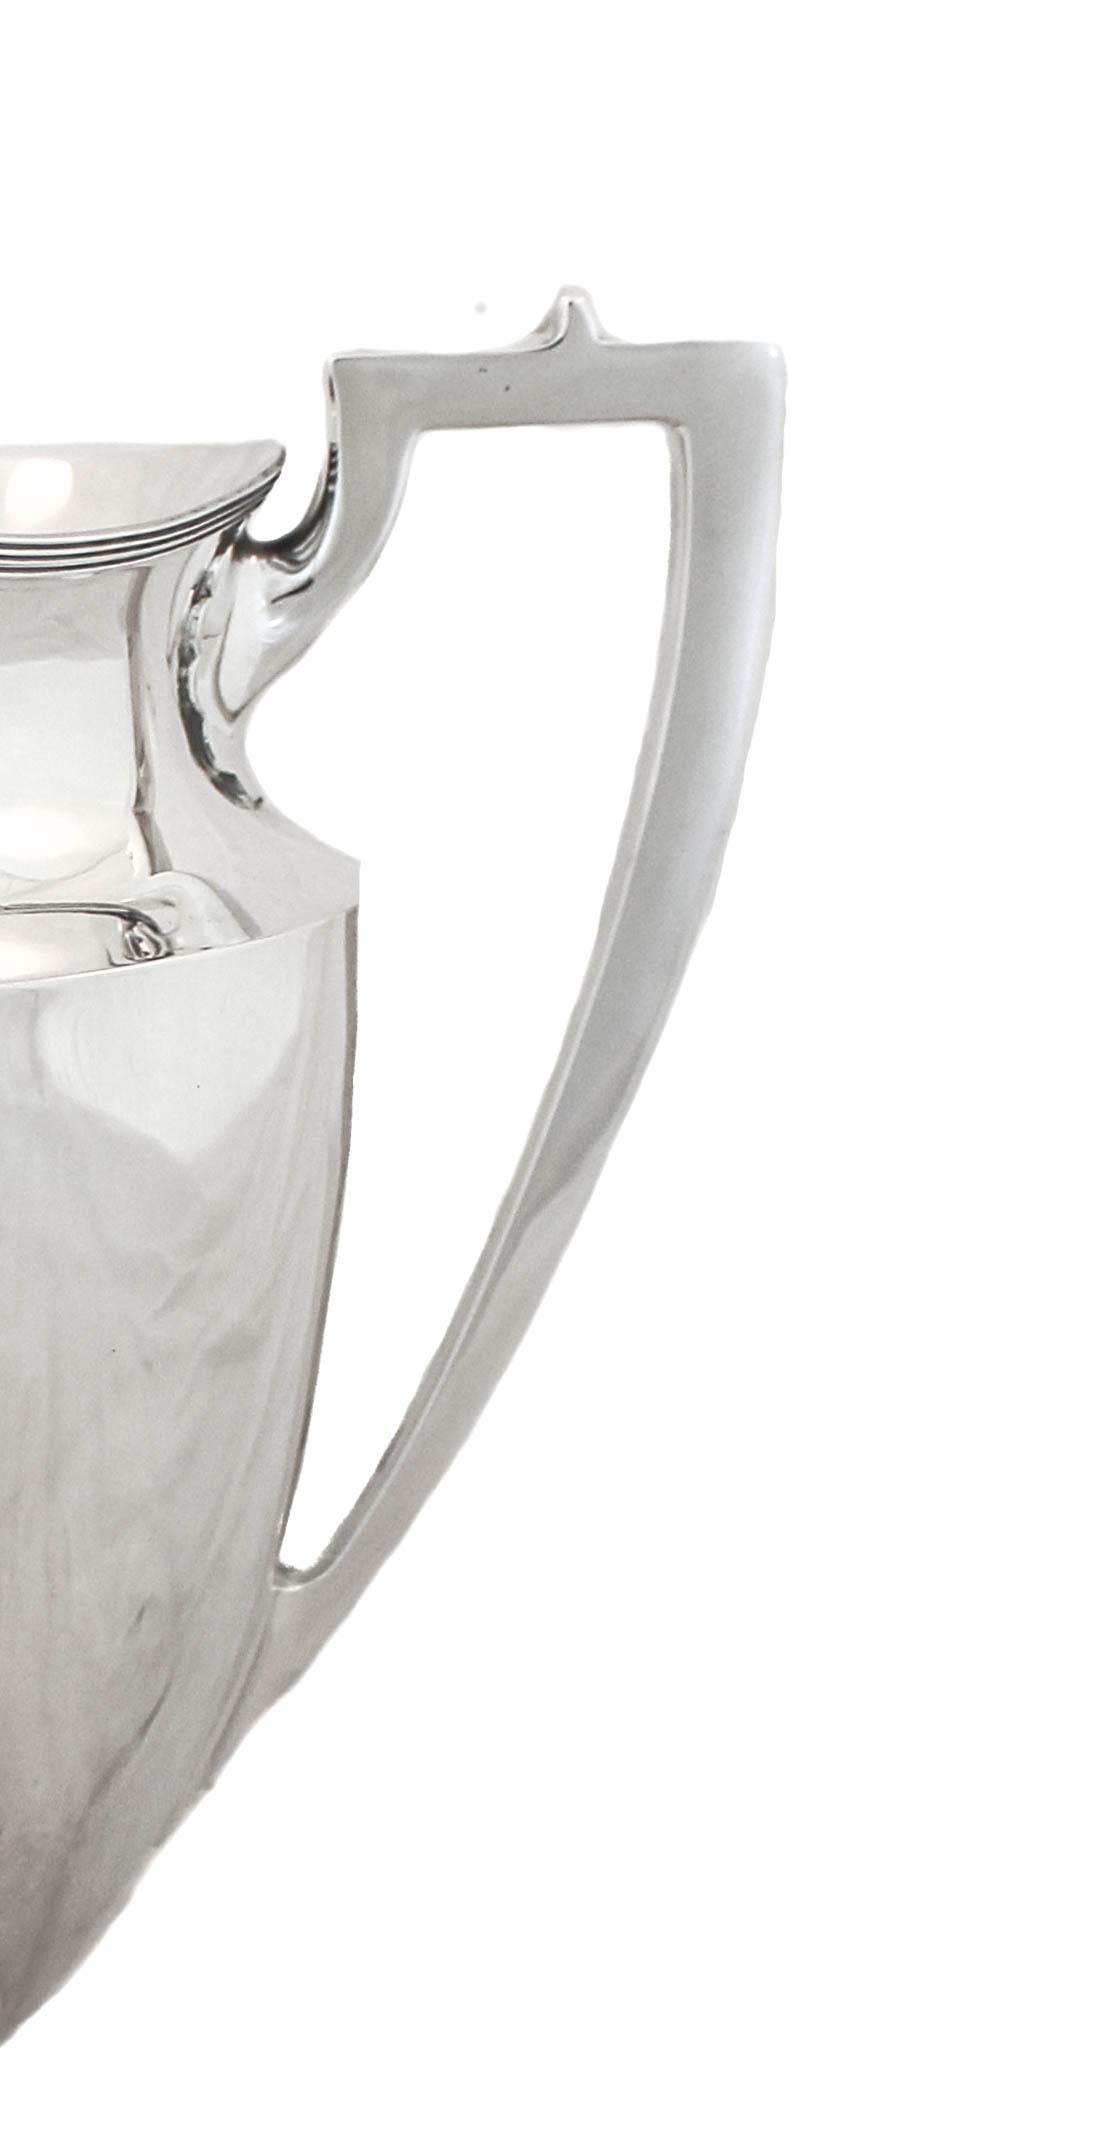 We are happy to offer you this sterling silver water pitcher by Black Starr & Frost. Designed in the Federal style, it is understated and simple with no etchings or decoration — keeping with the minimalist look. Notice the square shaped handle and